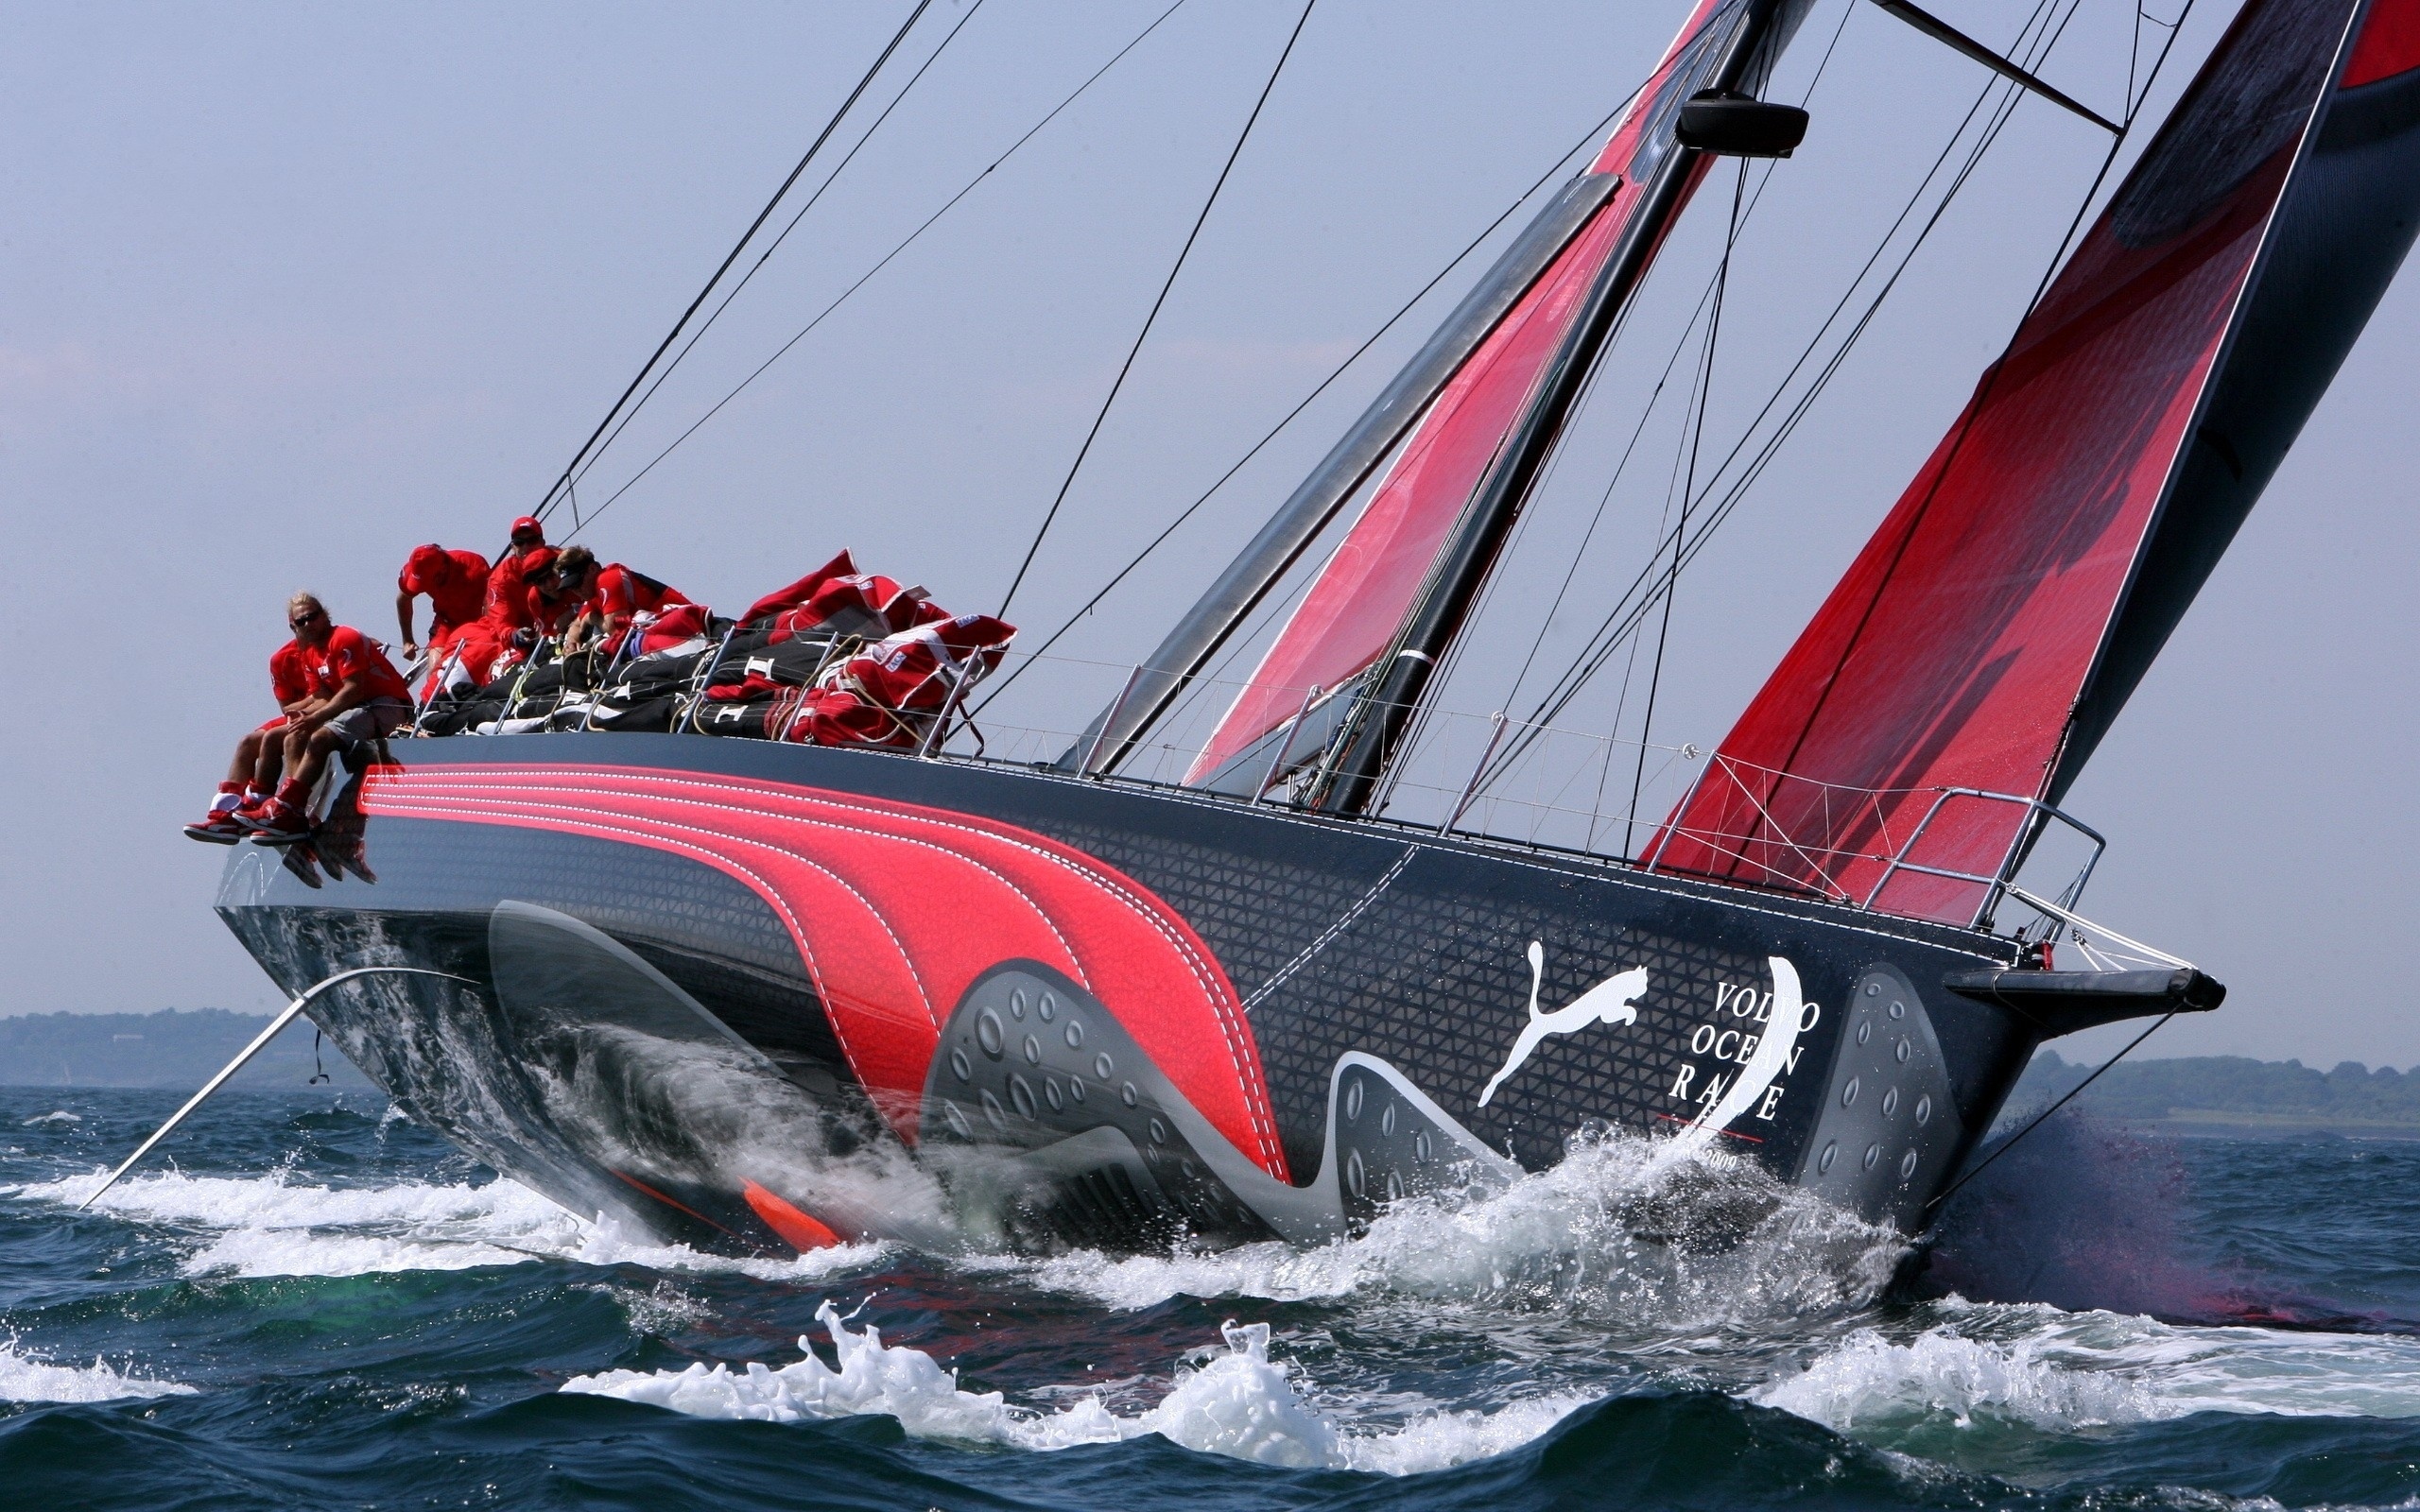 Sail Boat: Volvo Ocean Race, Sailing's greatest round-the-world challenge. 2560x1600 HD Wallpaper.